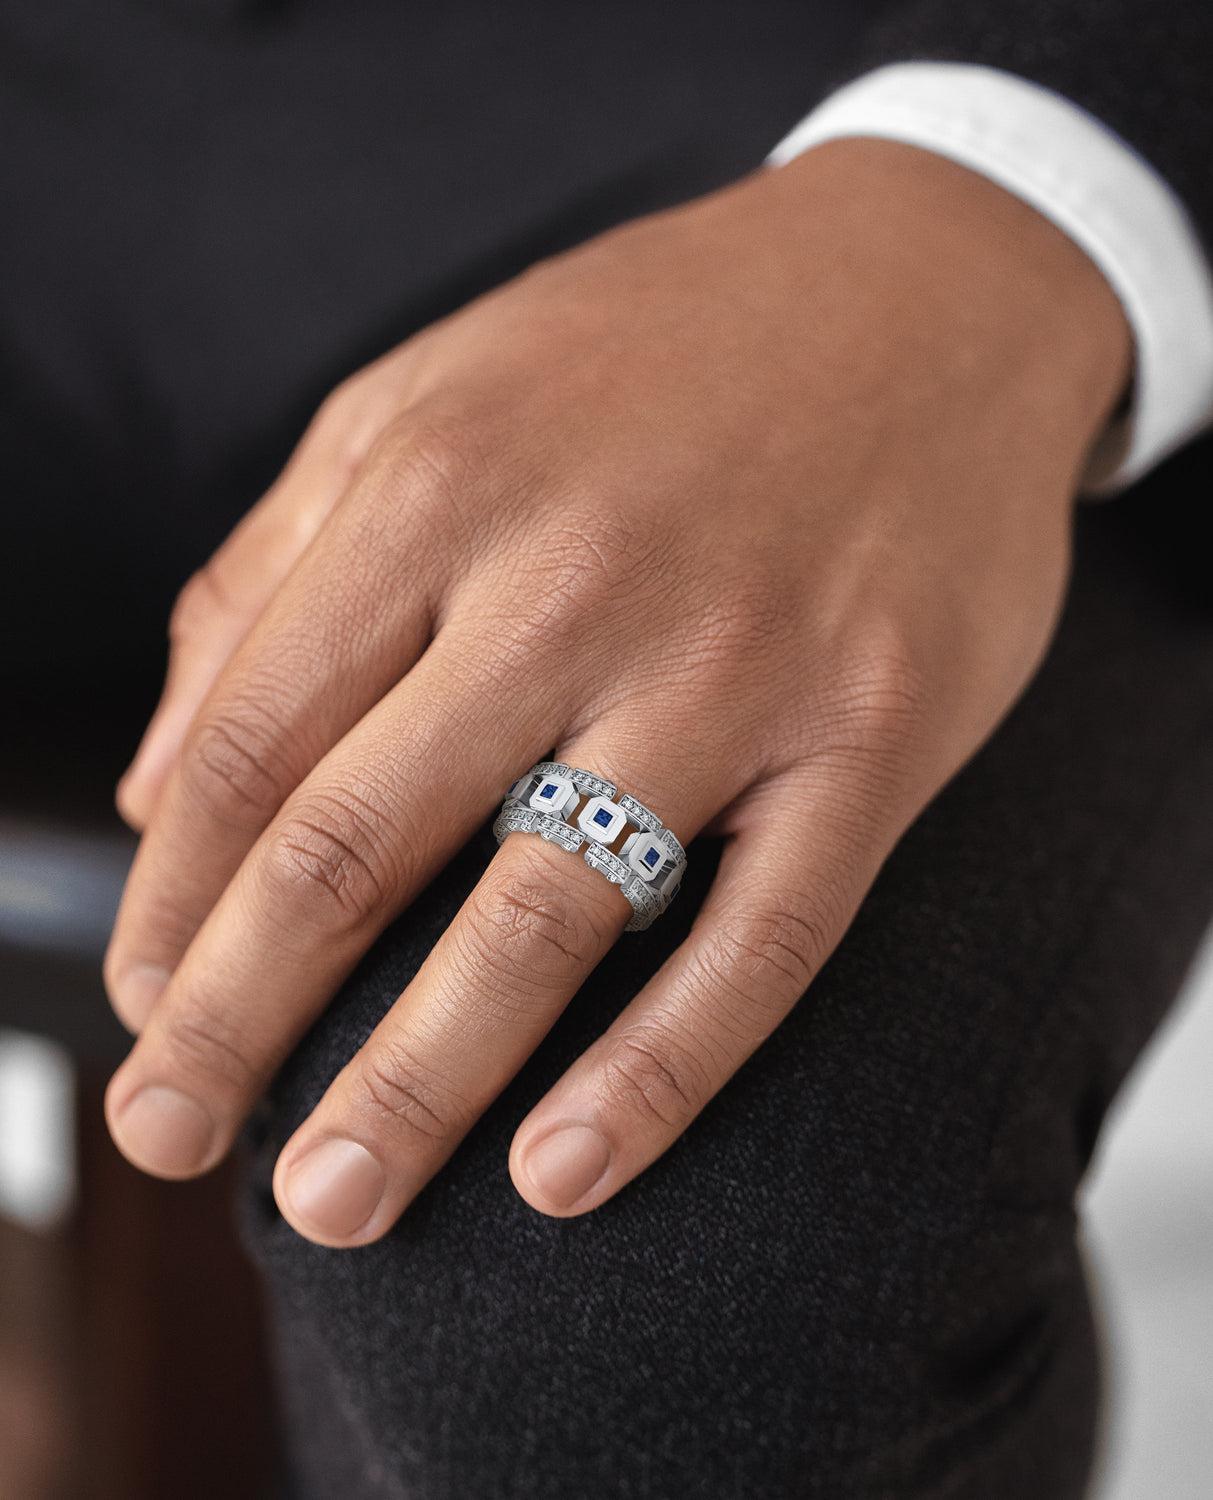 The design of this band bridges two different styles in its variations of 1.20ct sapphire pave setting and metals: contemporary classic and cutting-edge modern. The La Paz, often enjoyed as an exceptional statement piece, can even be worn as a